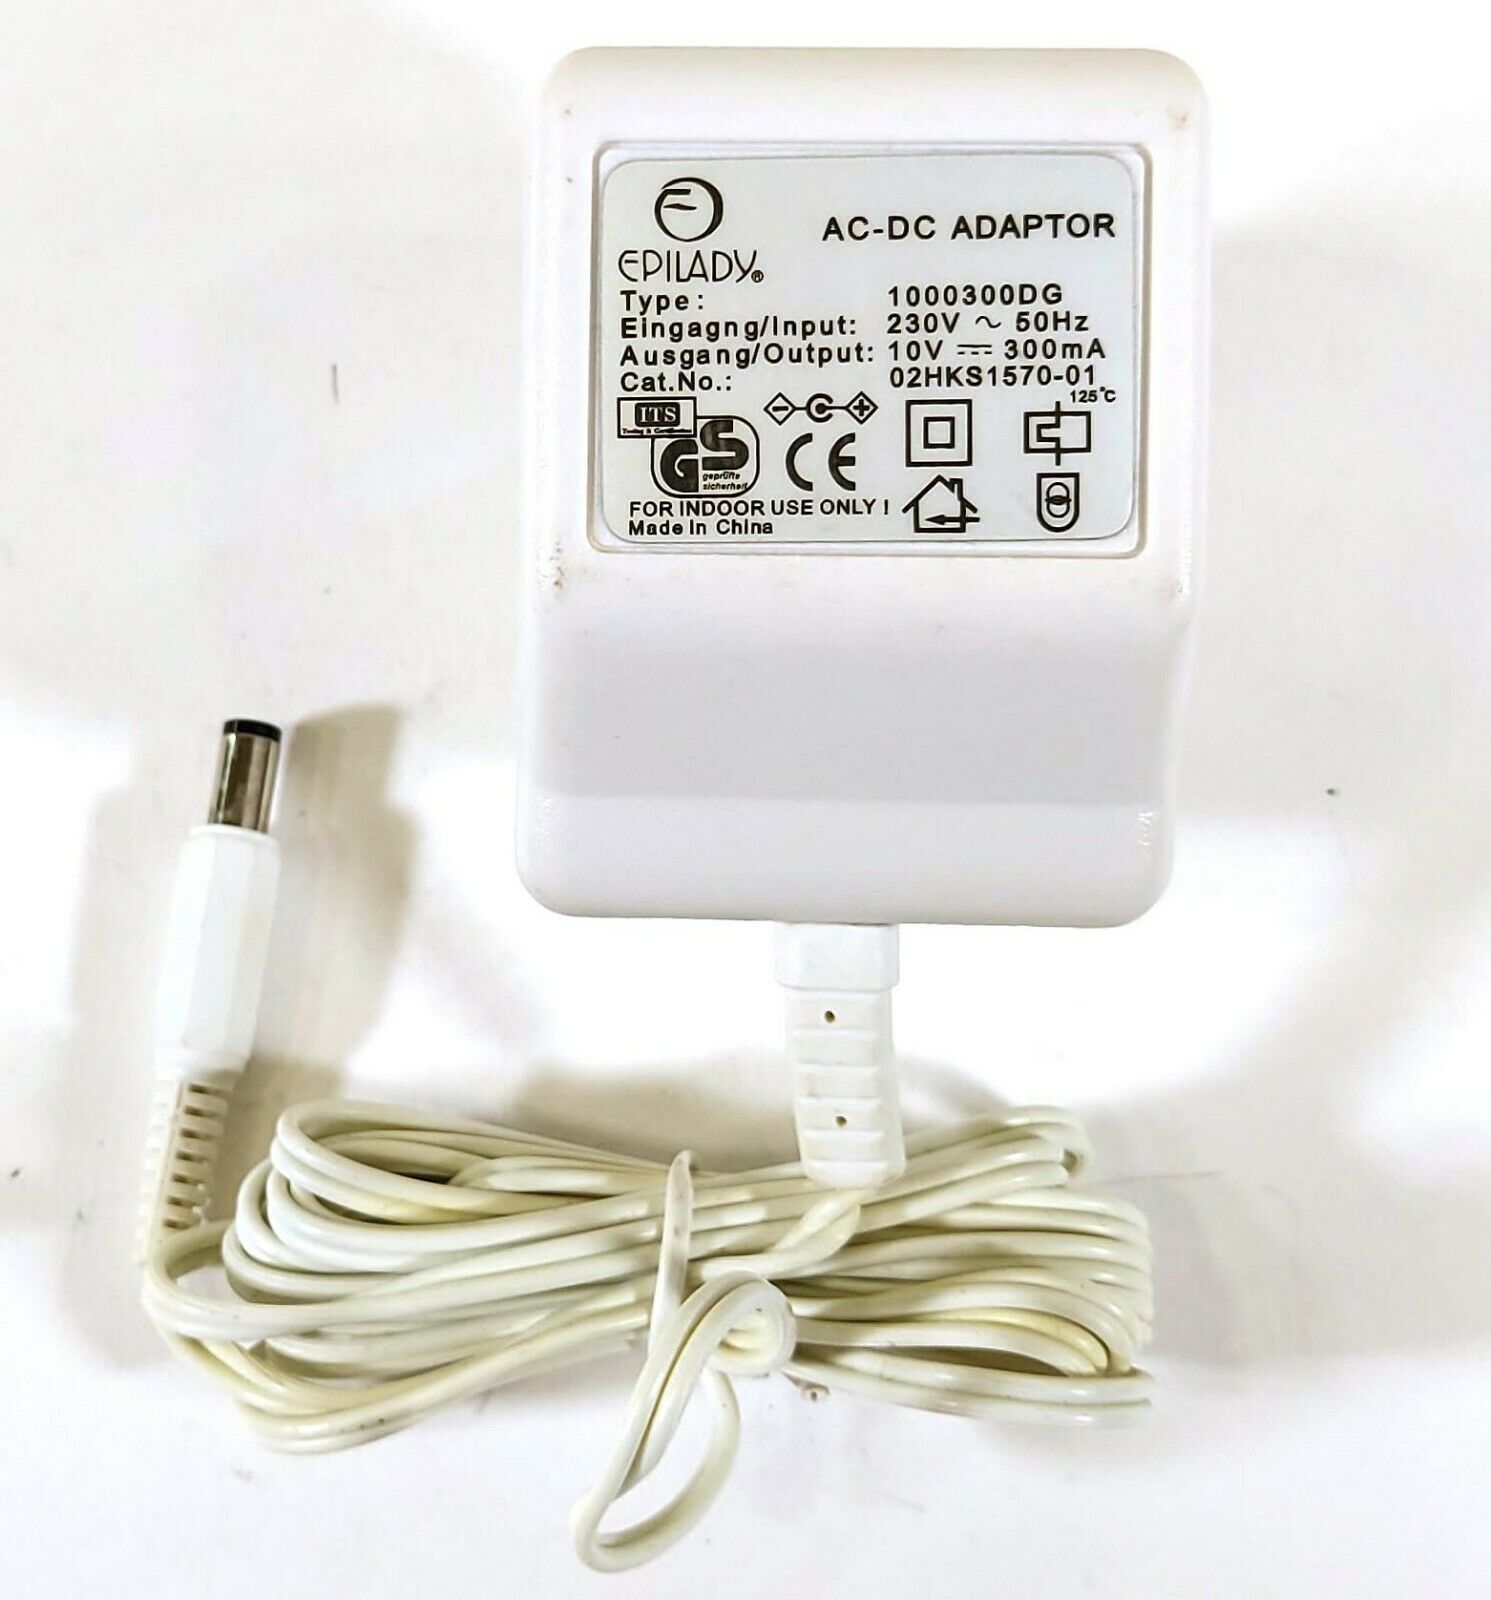 GS Epilady 1000300DG AC/DC Adapter 10V 300mA Original Charger Power Supply D274 Output Current: 300 mA Compatible Bran